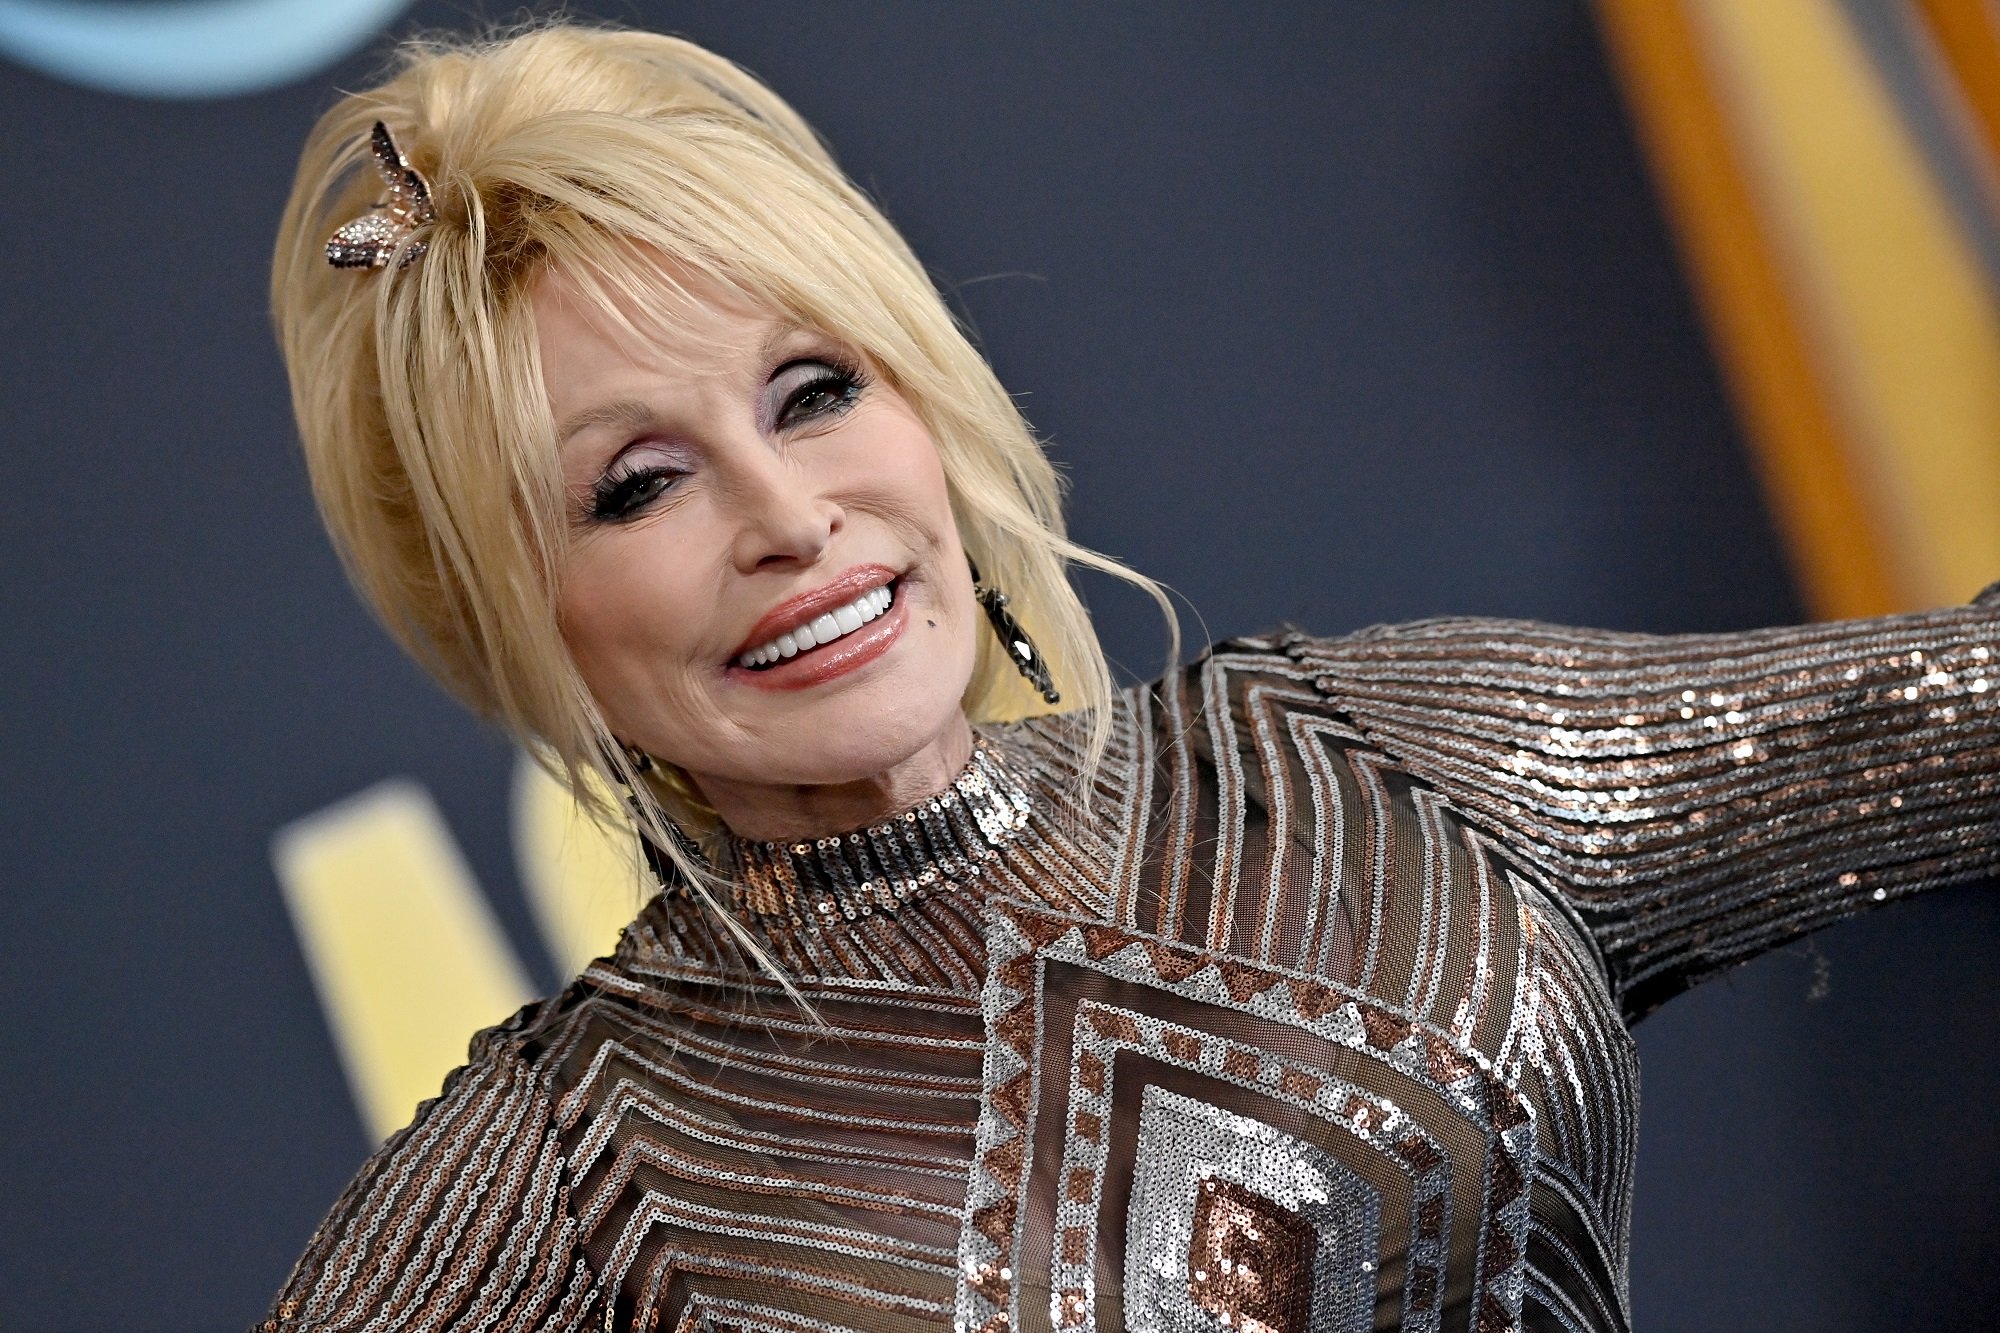 Dolly Parton’s new song "Don't Make Me Have to Come Down There"